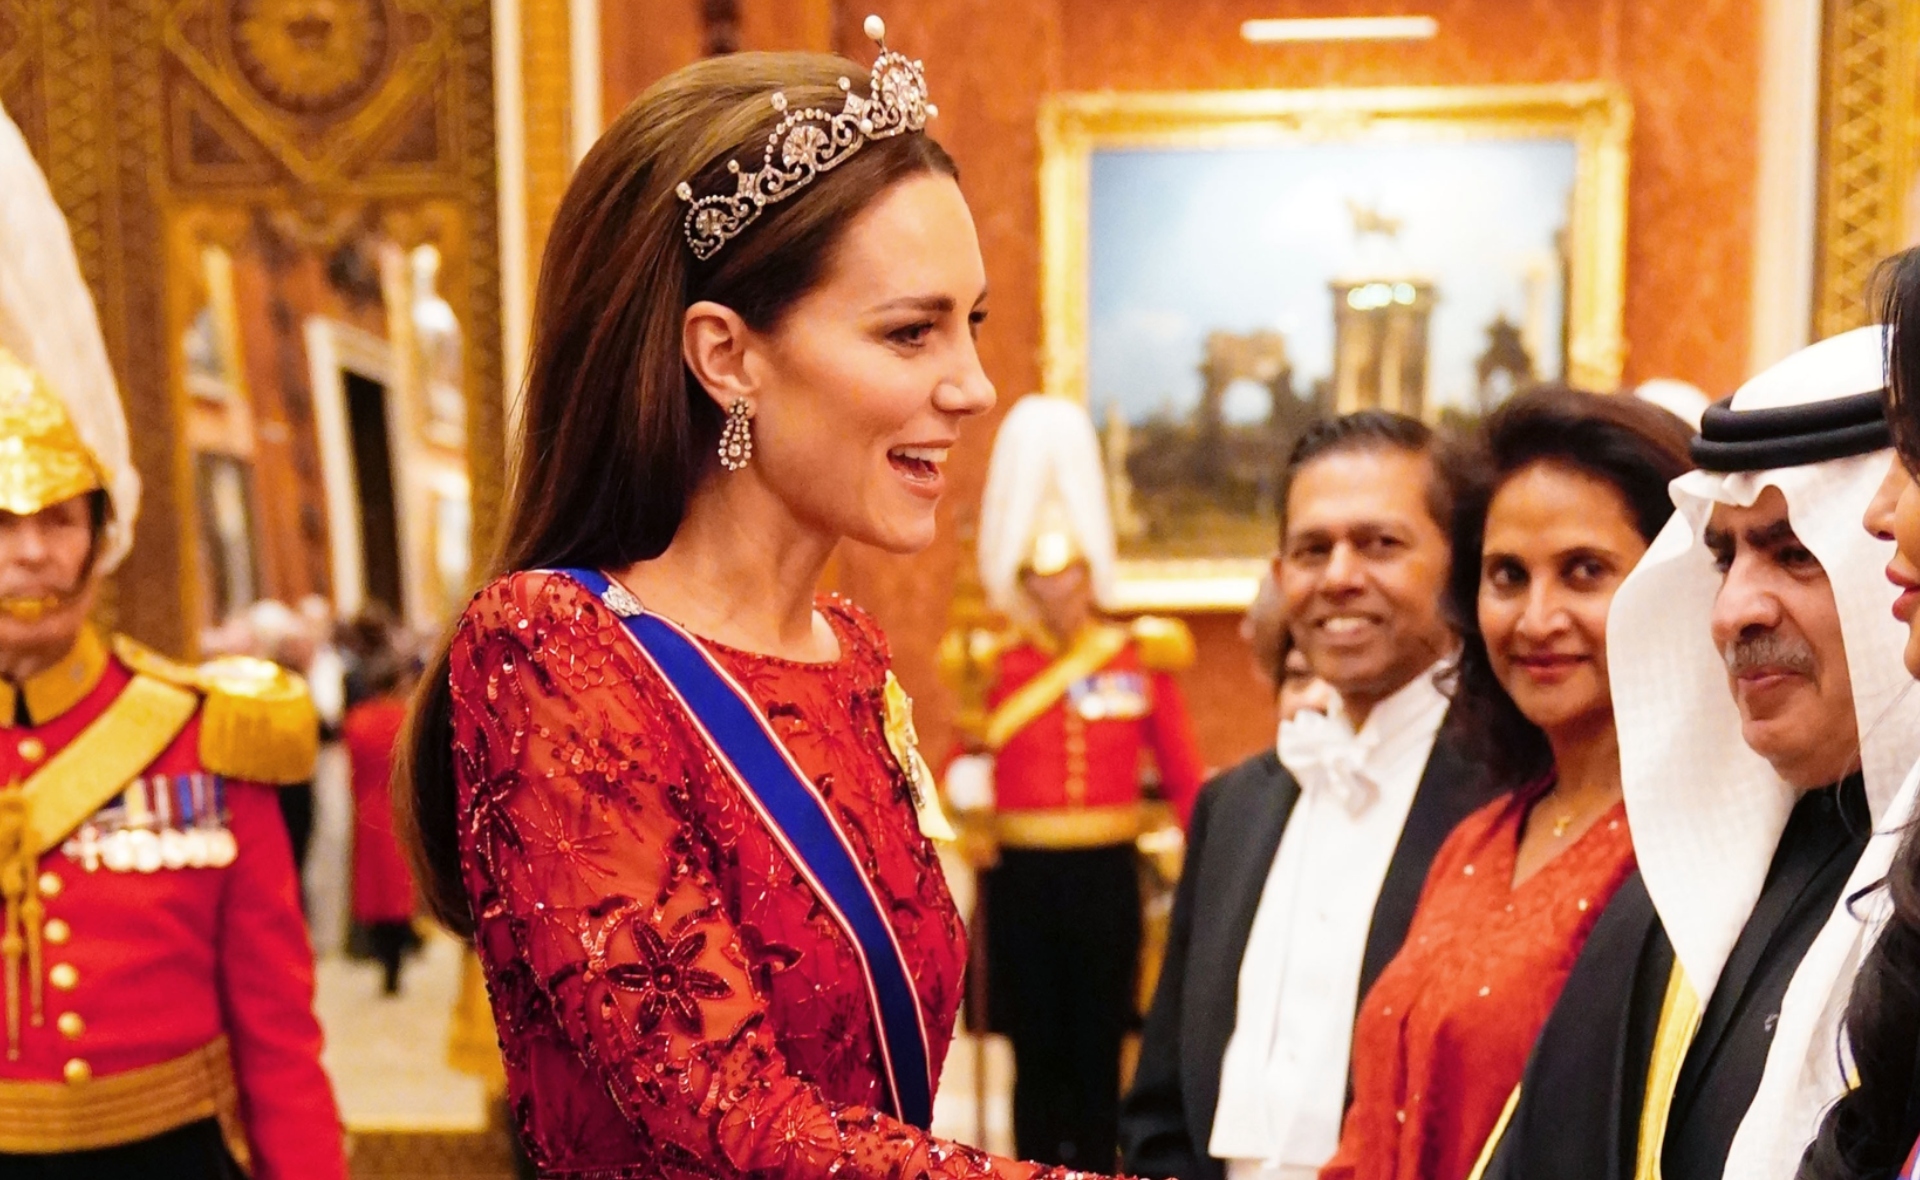 Kate Middleton Just Had Another Tiara Moment In A Christmas-Themed Ensemble